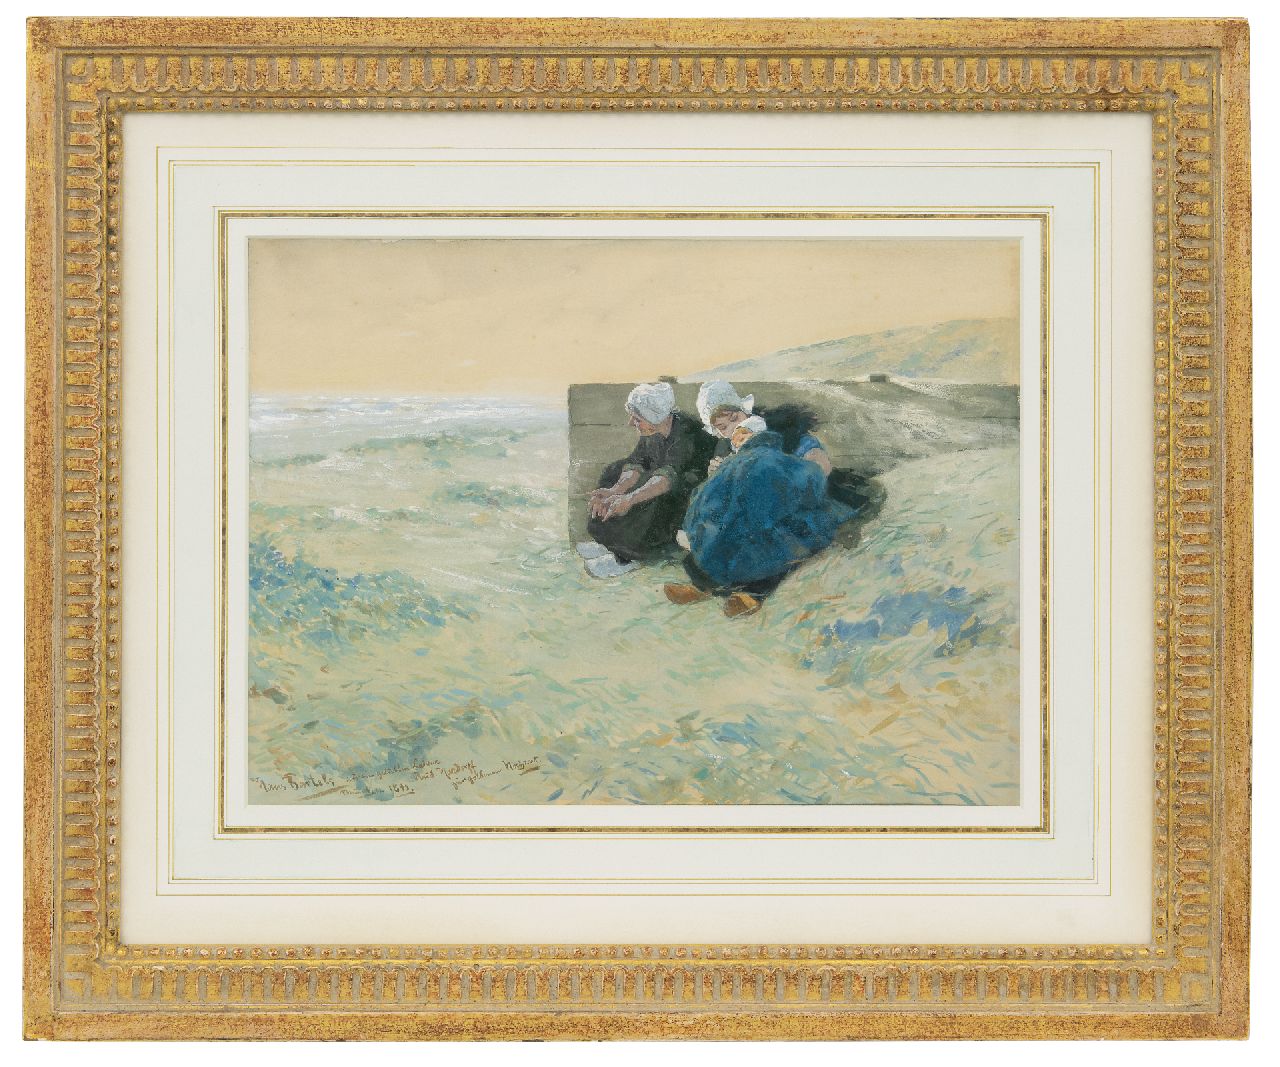 Bartels H. von | Hans von Bartels, Two women and a child in the dunes, gouache on paper 29.7 x 40.6 cm, signed l.l. and dated 'München 1893'